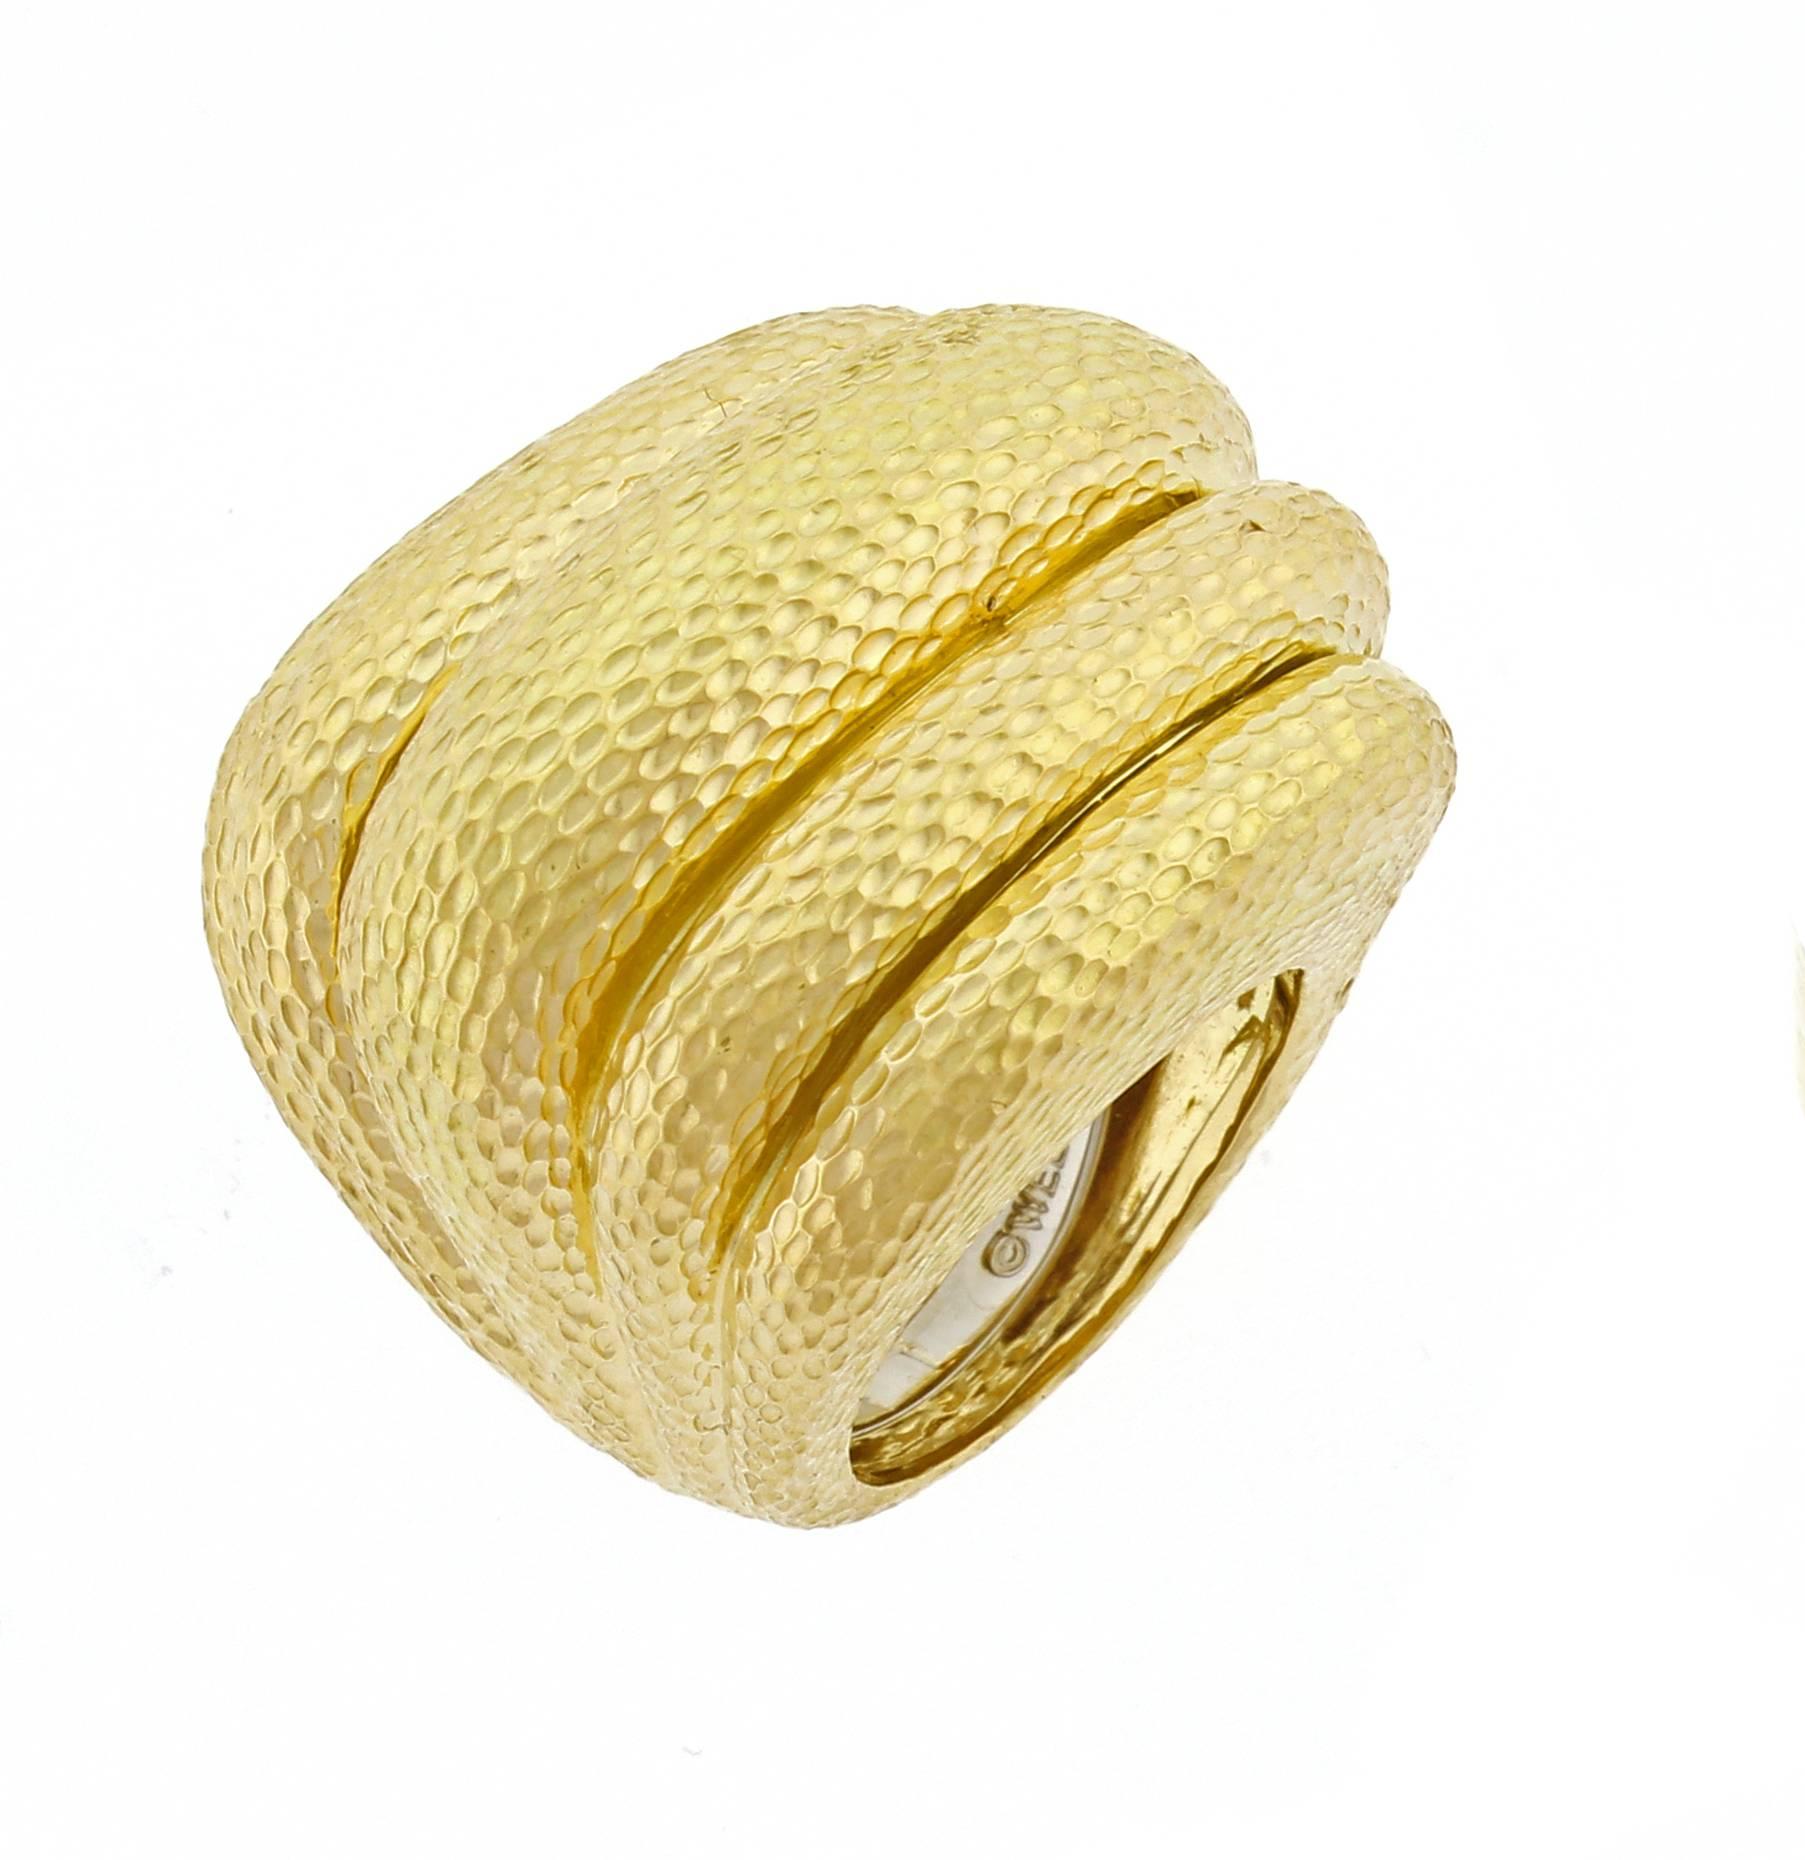 From David Webb, this fashionable 18 karat dome ring. The ring features David Webb's signature hand hammered finish and bold style. The ring measures 1.25 by 1 inch, 34.5 grams. Size 6 expandable guard. This ring has been restored to its original